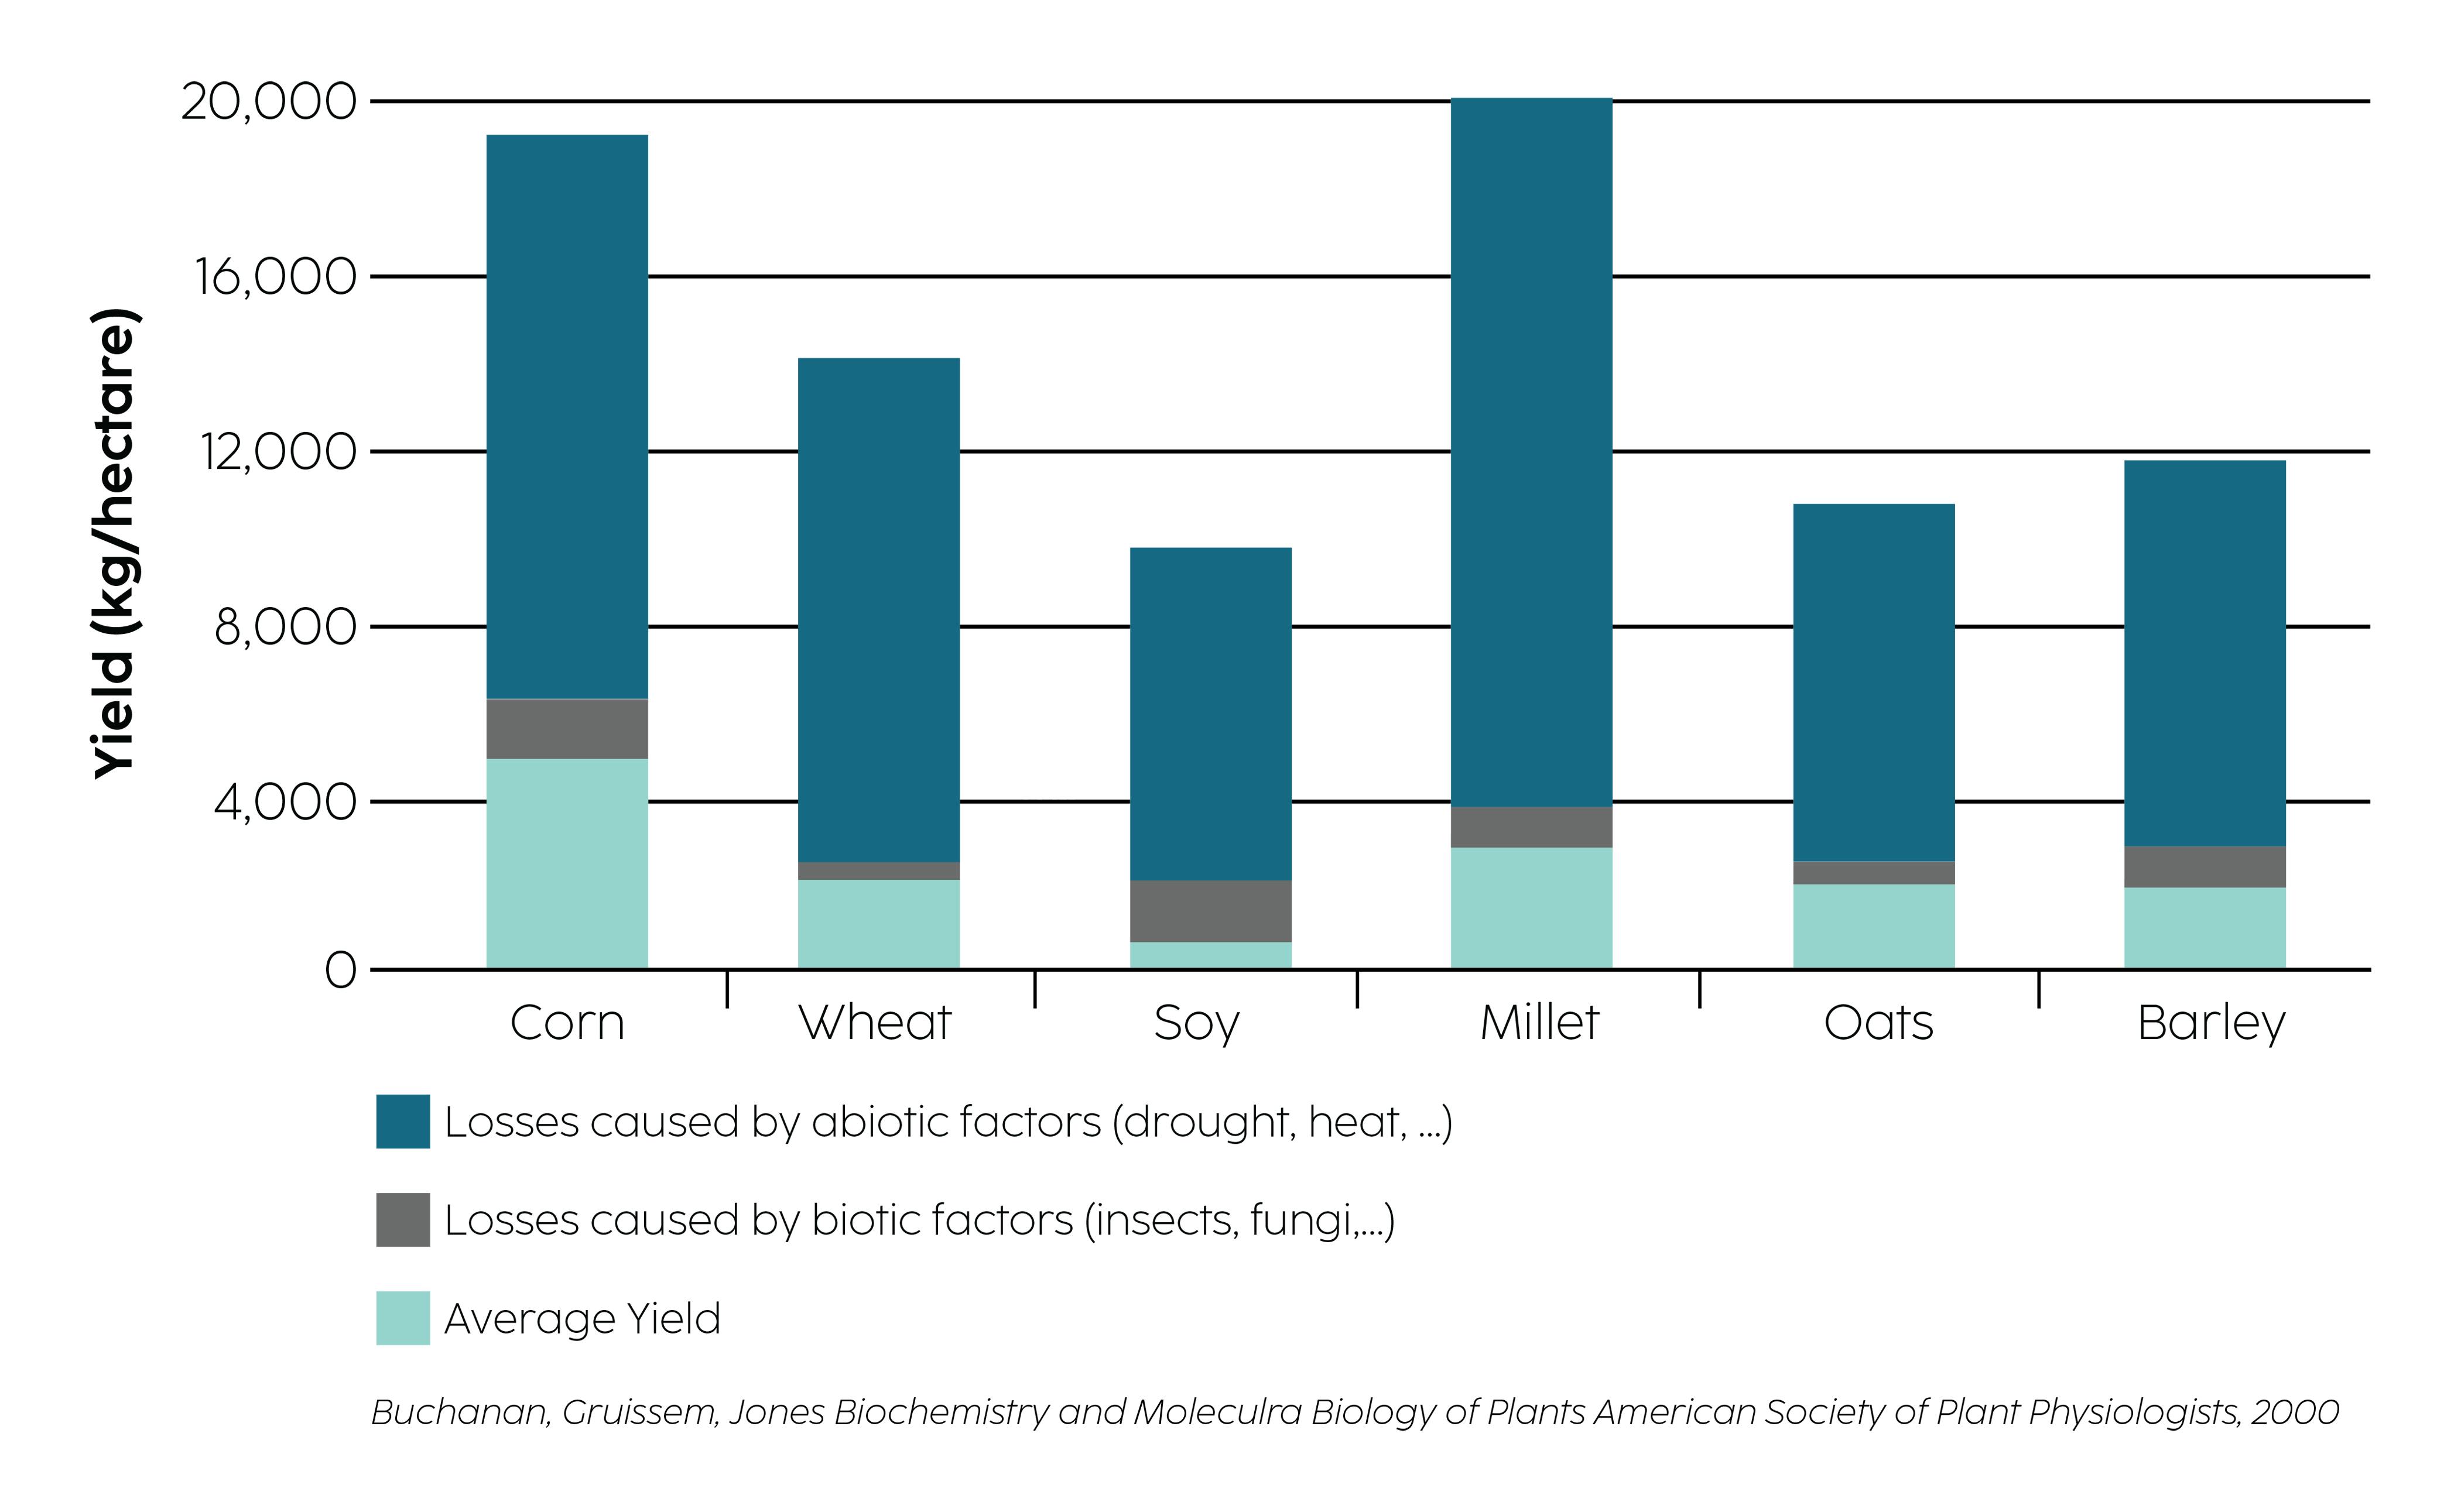 This graph shows how the vast majority of yield losses are caused by abiotic factors rather than biotic factors across crops such as corn, wheat, soy, millet, oats, and barley. 